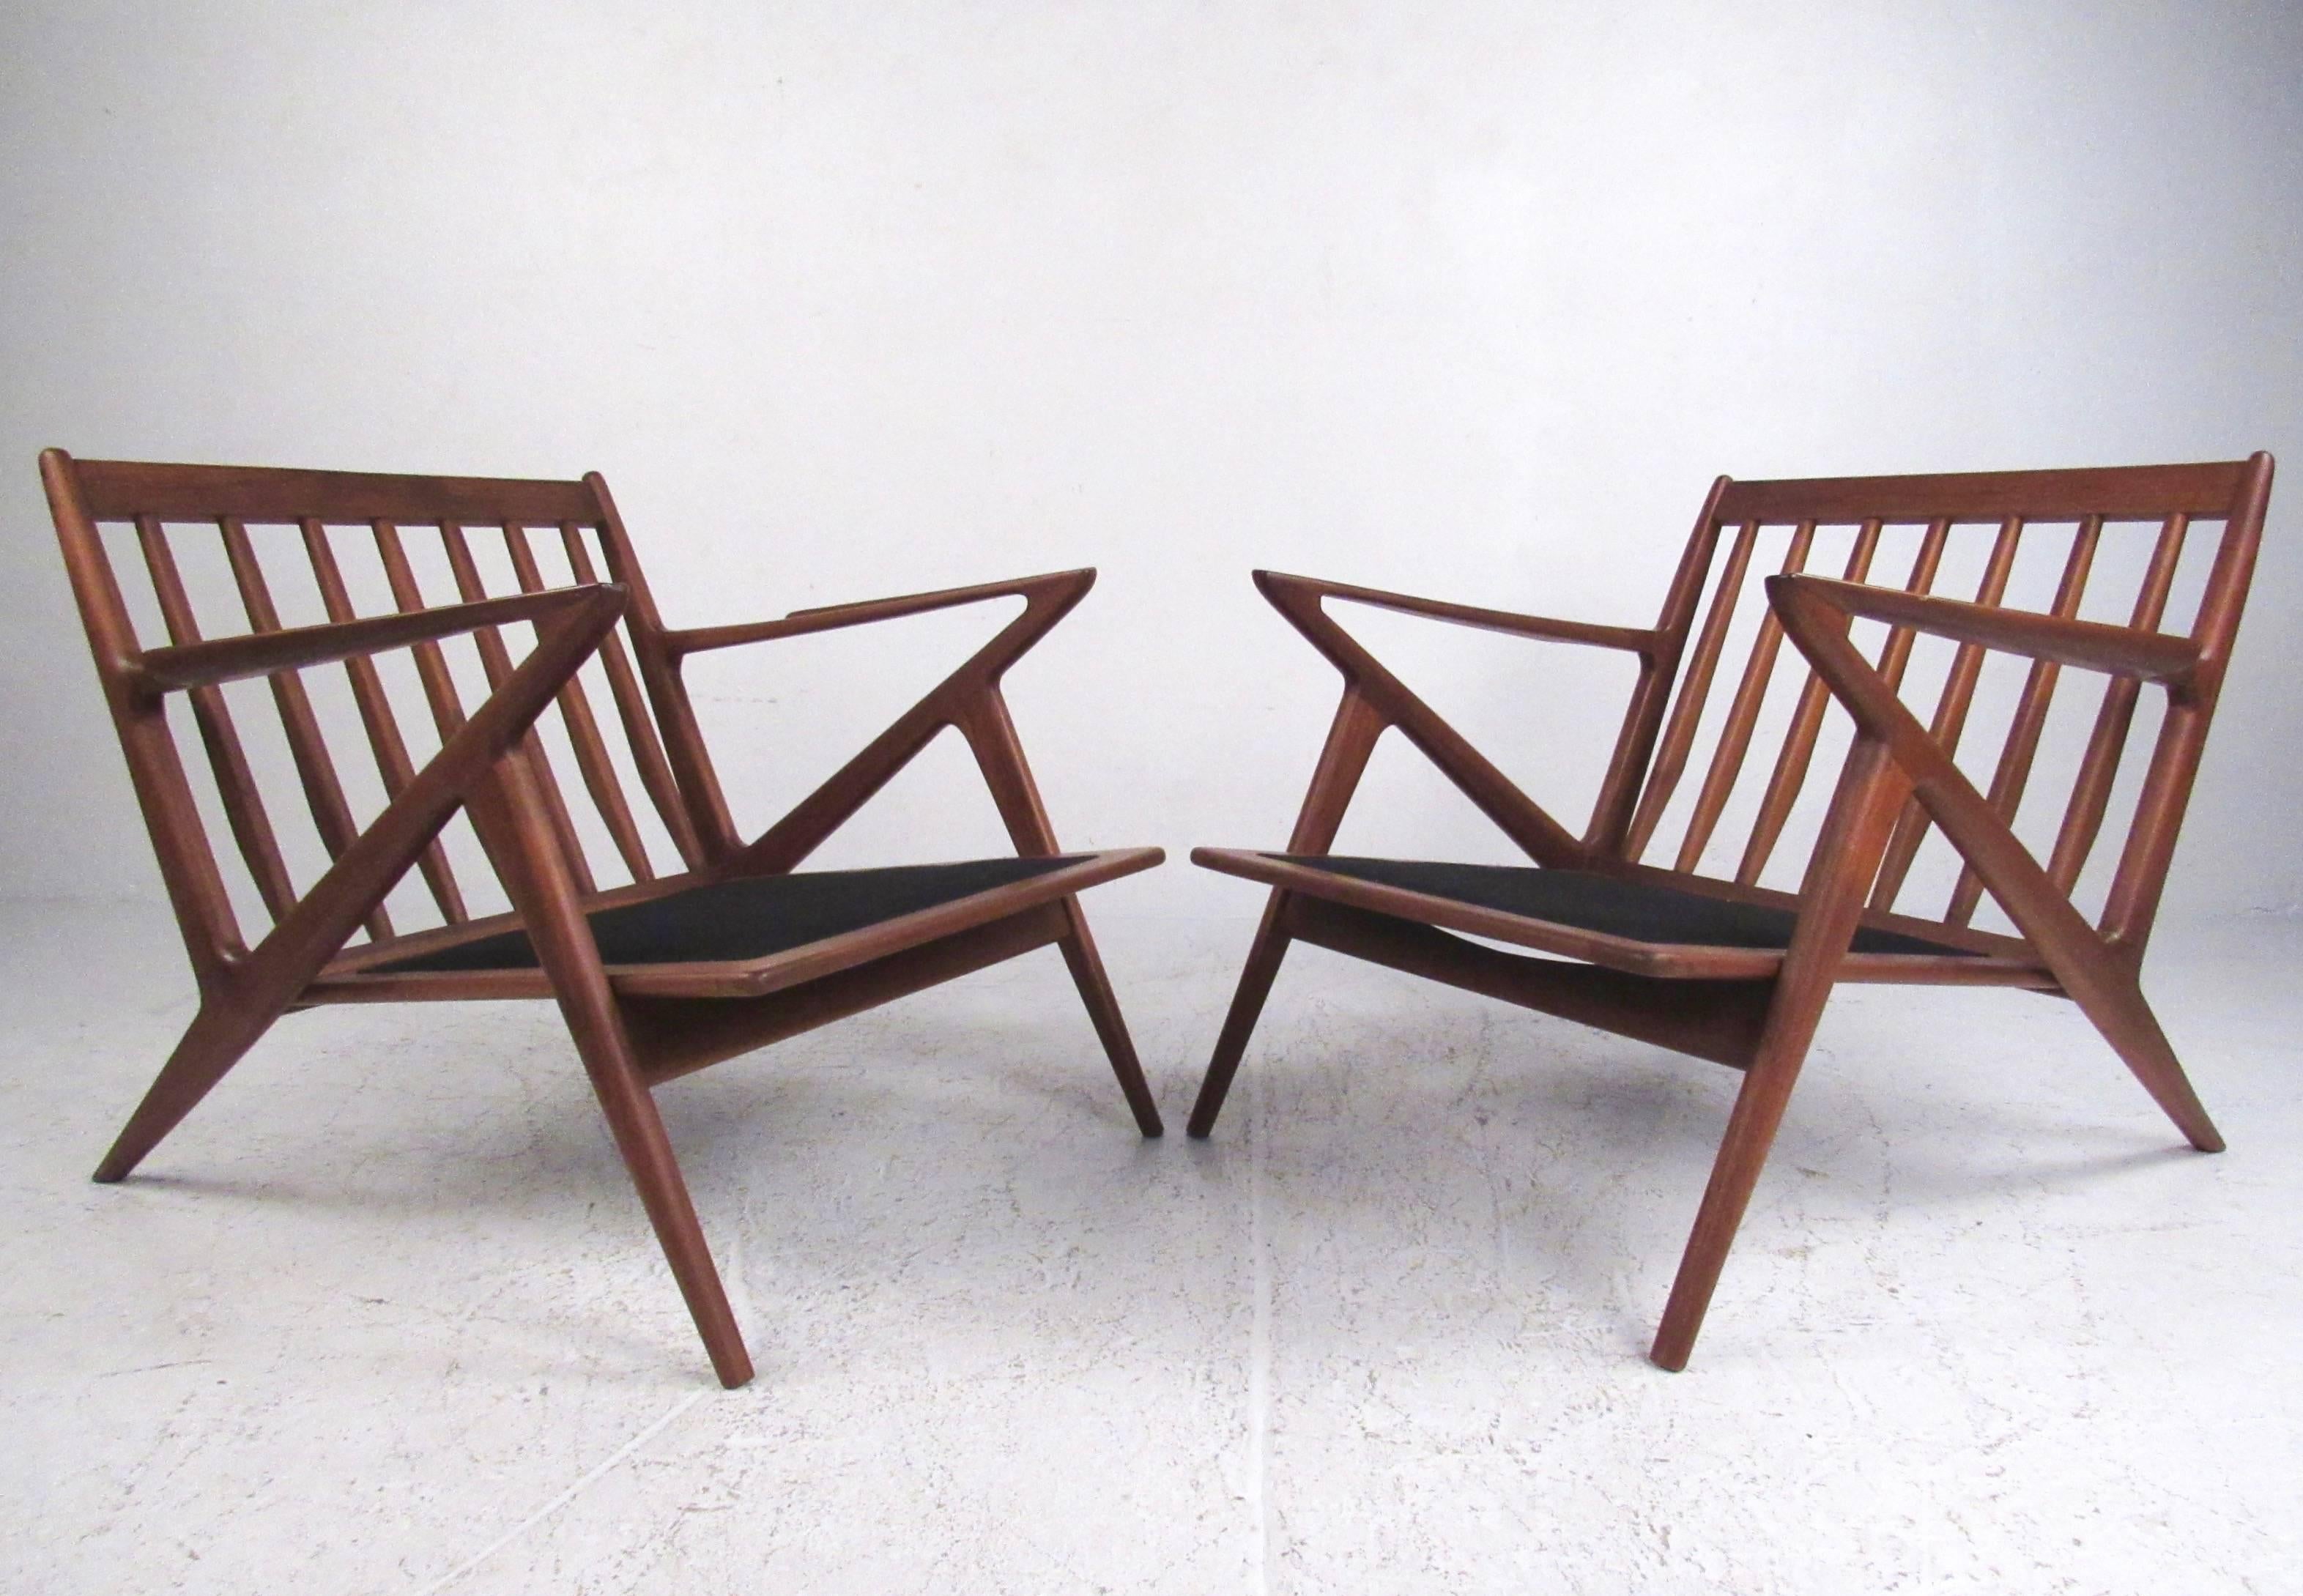 This exquisite Mid-Century style pair of teak lounge chairs feature stunning sculpted frames with slat backs and unique angles. Excellent addition to any modern interior, this beautiful pair combine impressive design with timeless comfort. Please